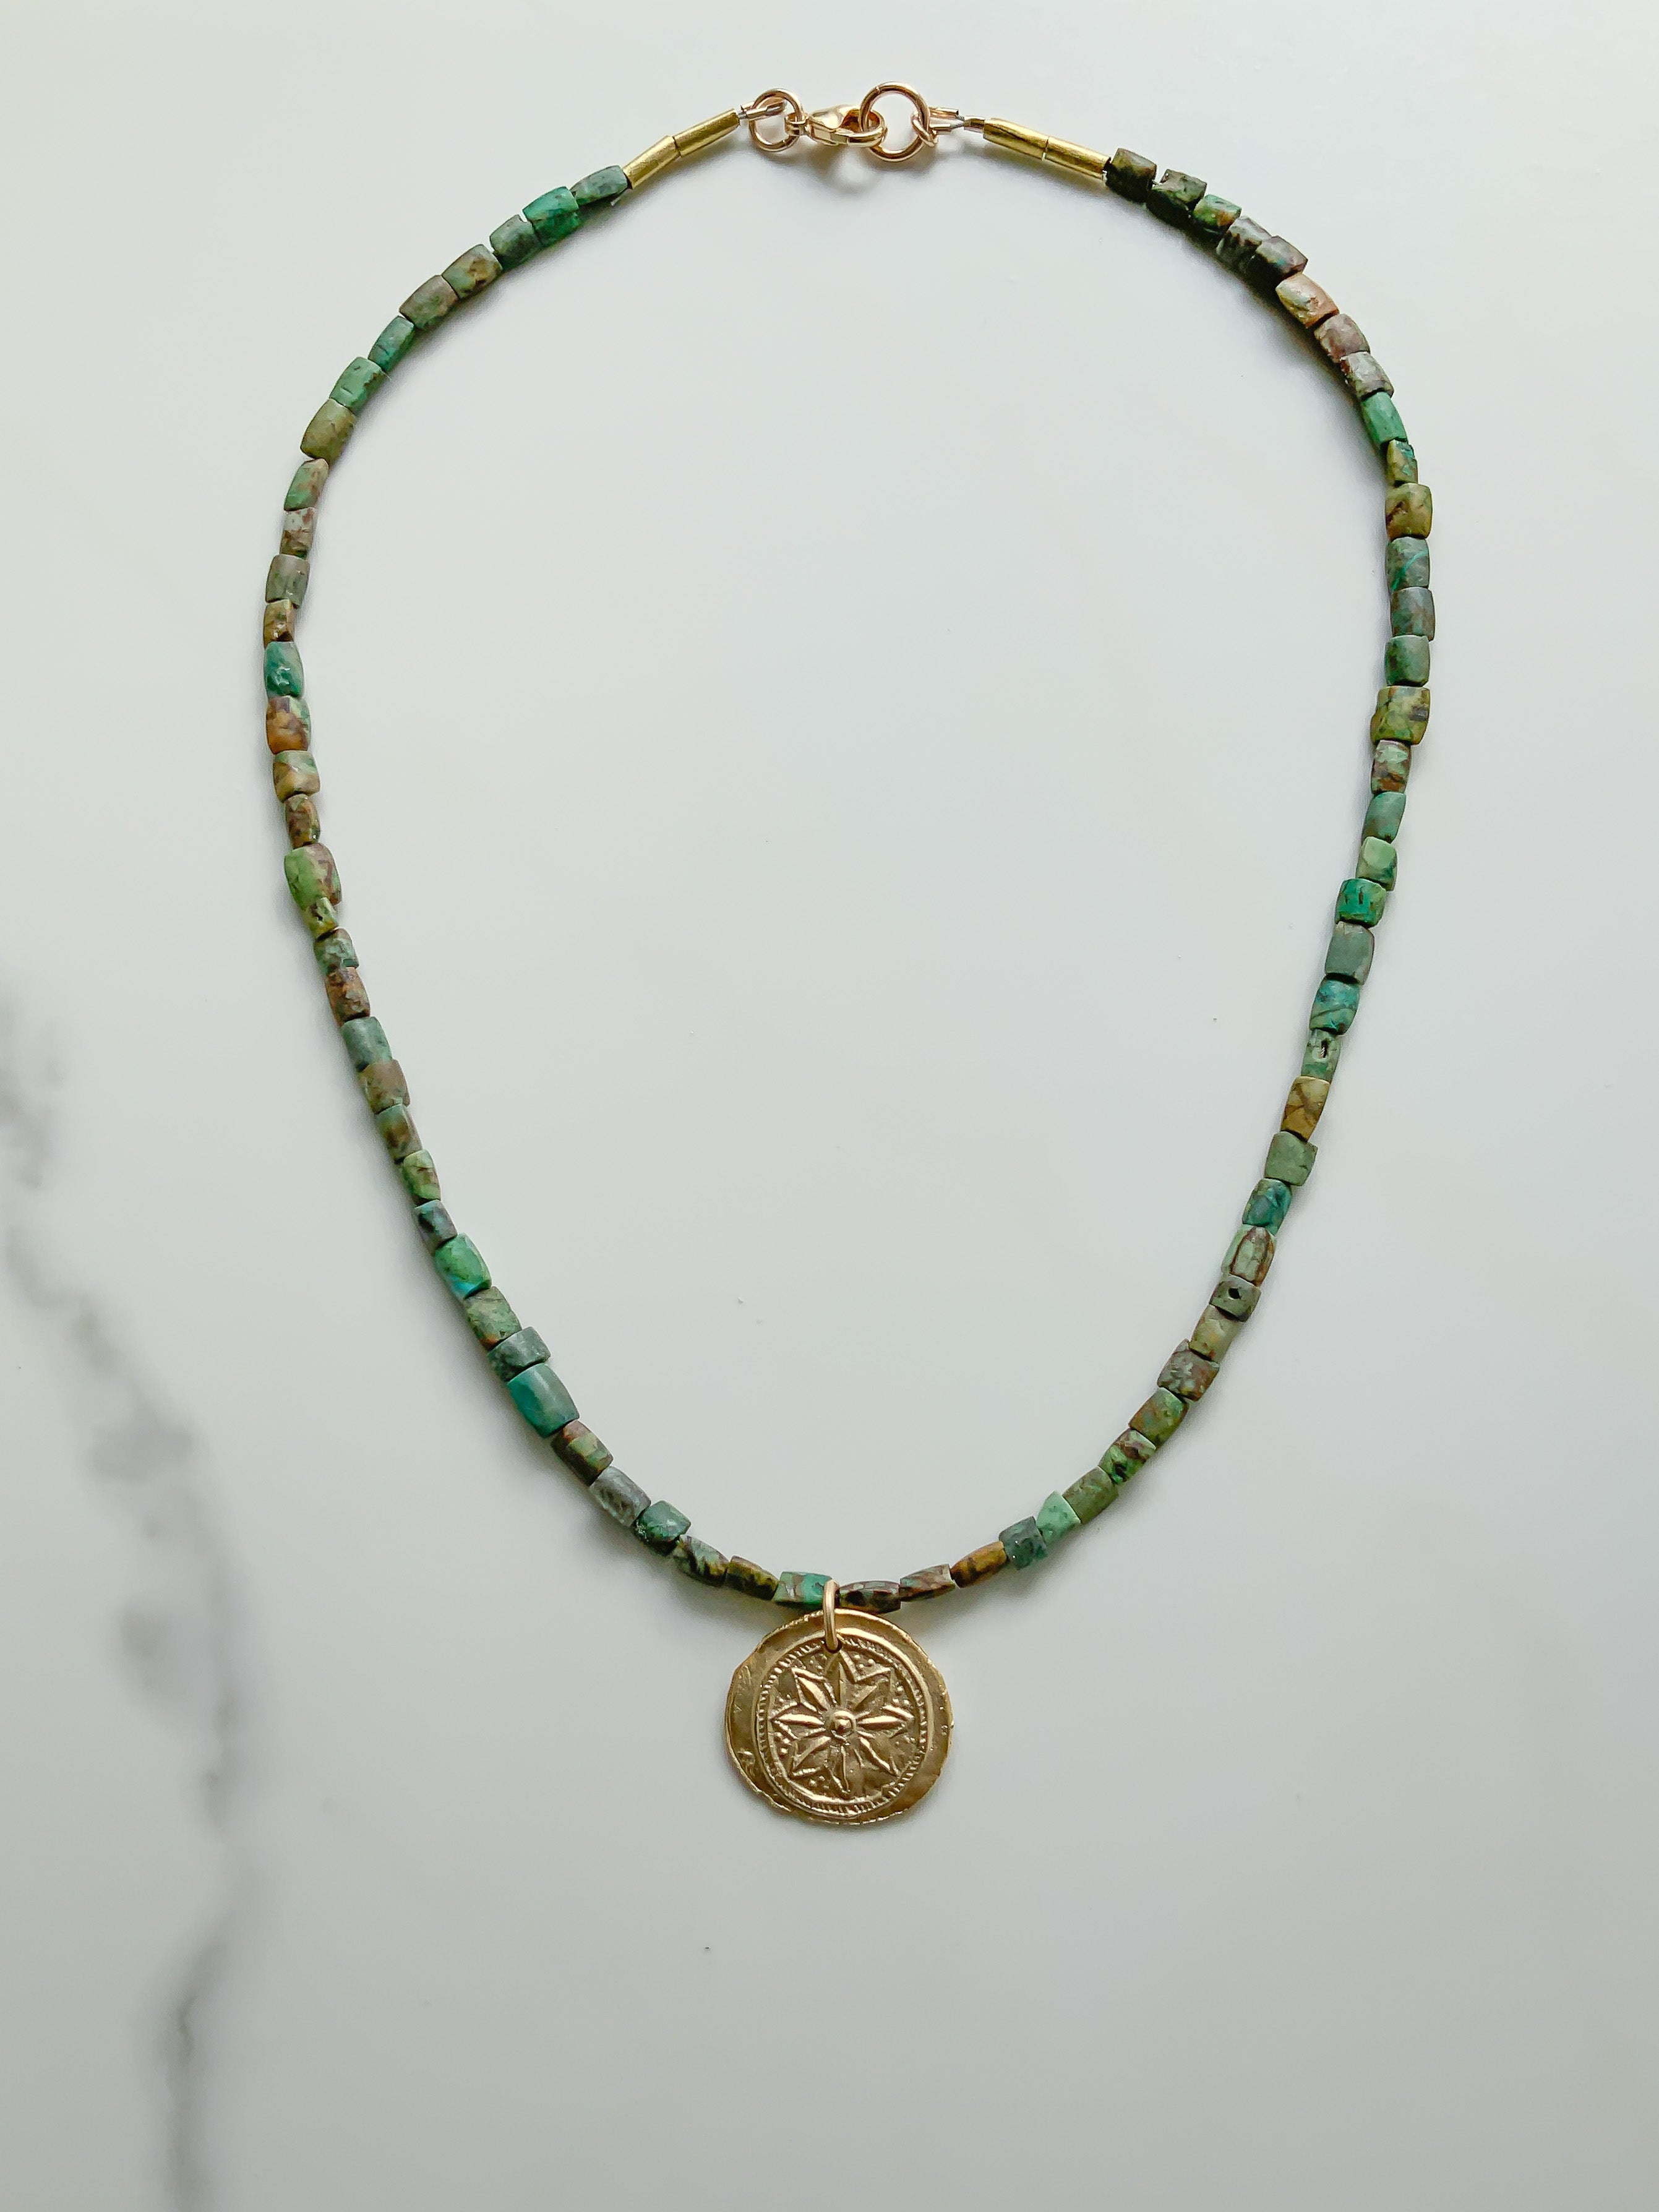 The Sundial Turquoise Necklace